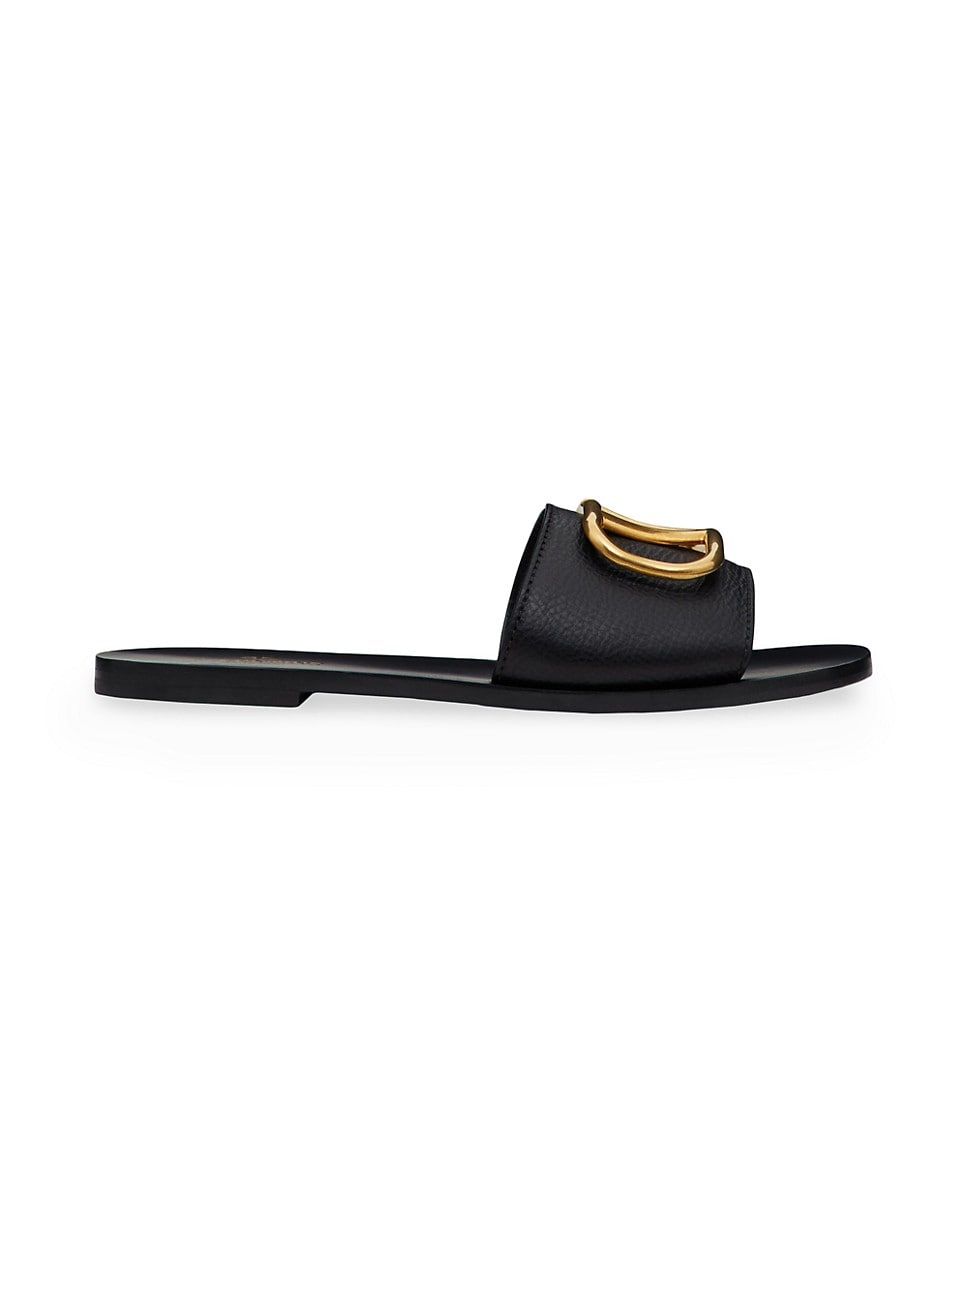 Vlogo Signature Slide Sandal In Grainy Cowhide With Accessory | Saks Fifth Avenue